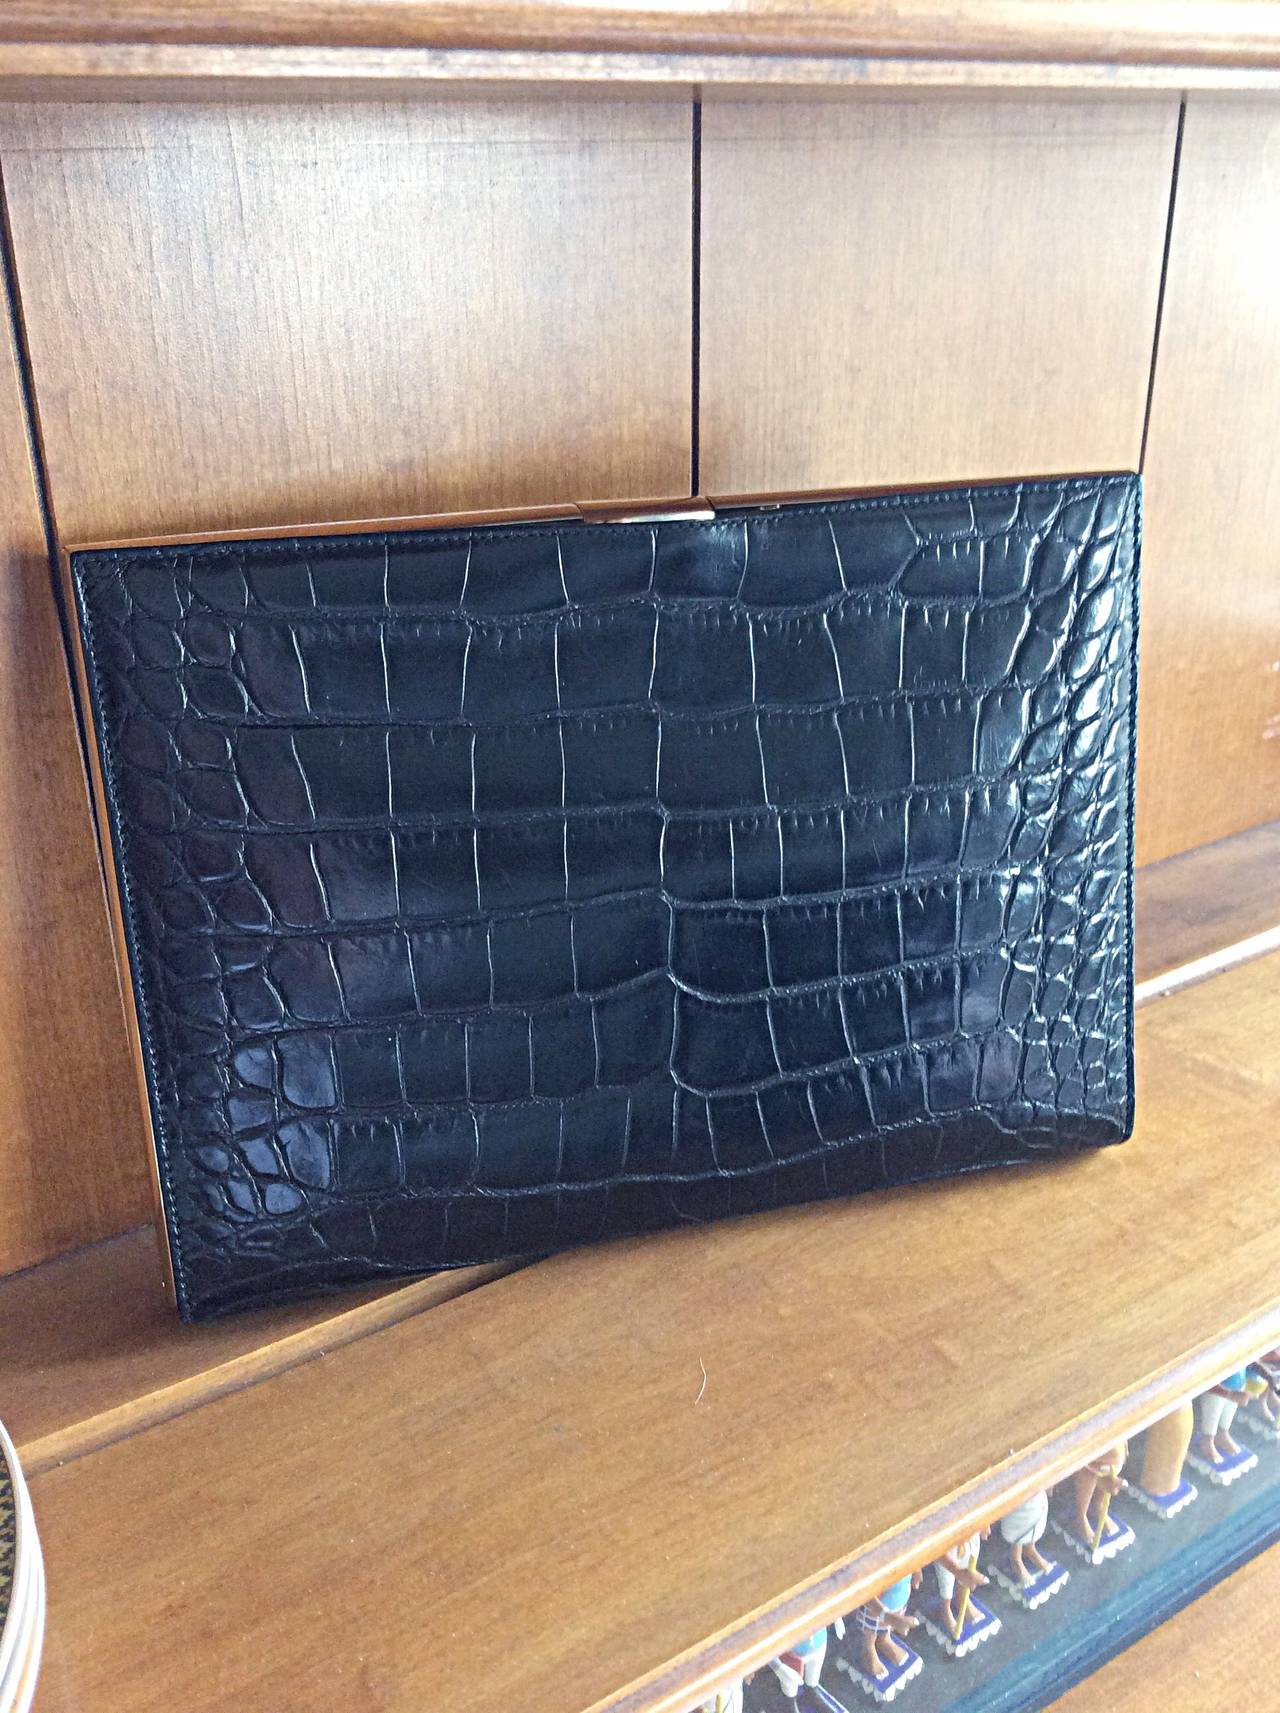 Gorgeous vintage Oscar de la Renta oversized alligator clutch. Farm raised gator, with beautiful large scales. Lined in soft beige suede, with sophisticated gold frame. Made in Italy. In great condition.